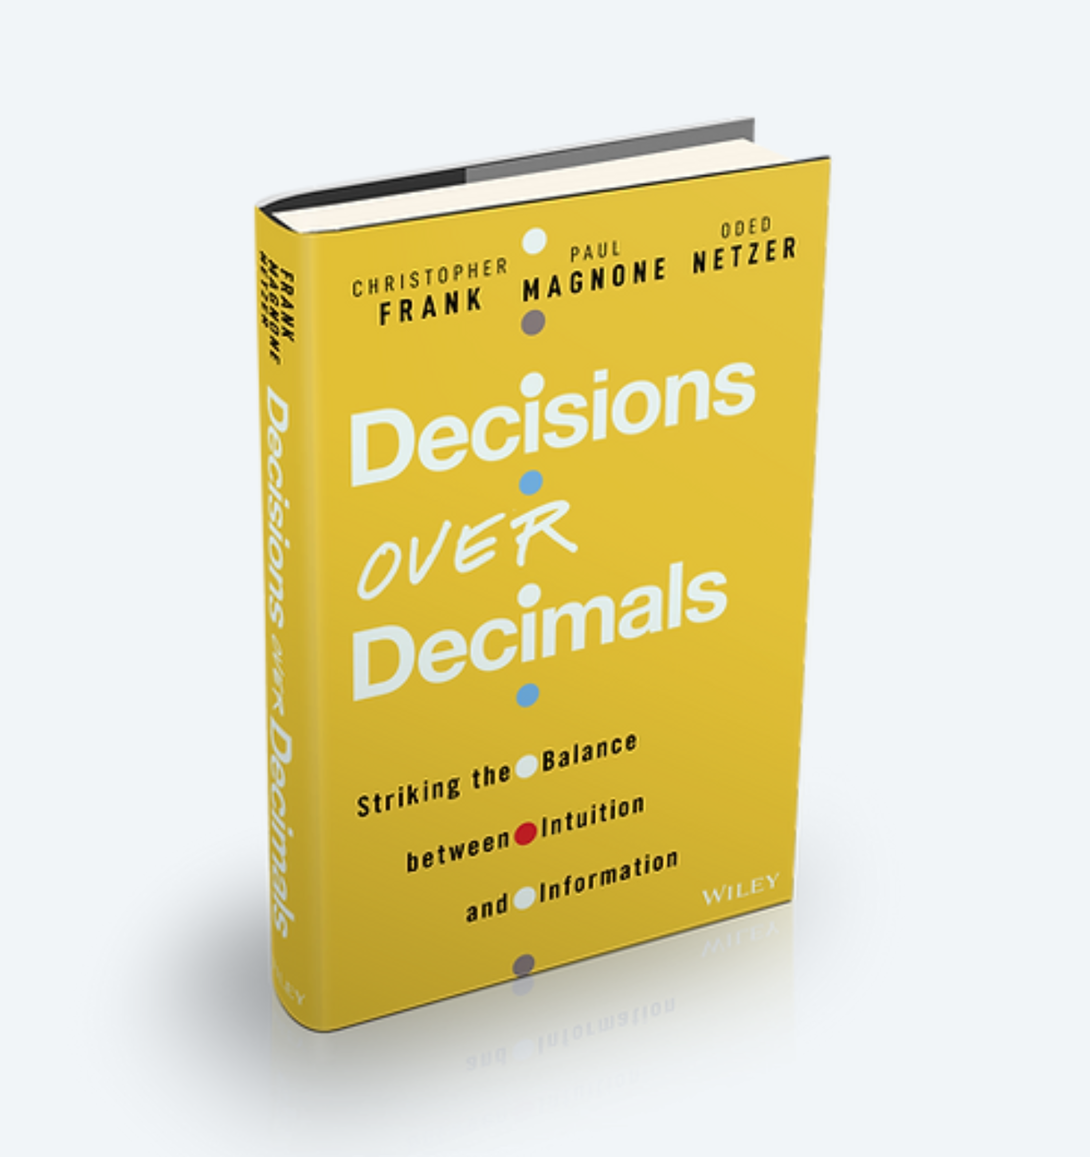 Decisons Over Decimals: Striking the Balance between Intuition and Information